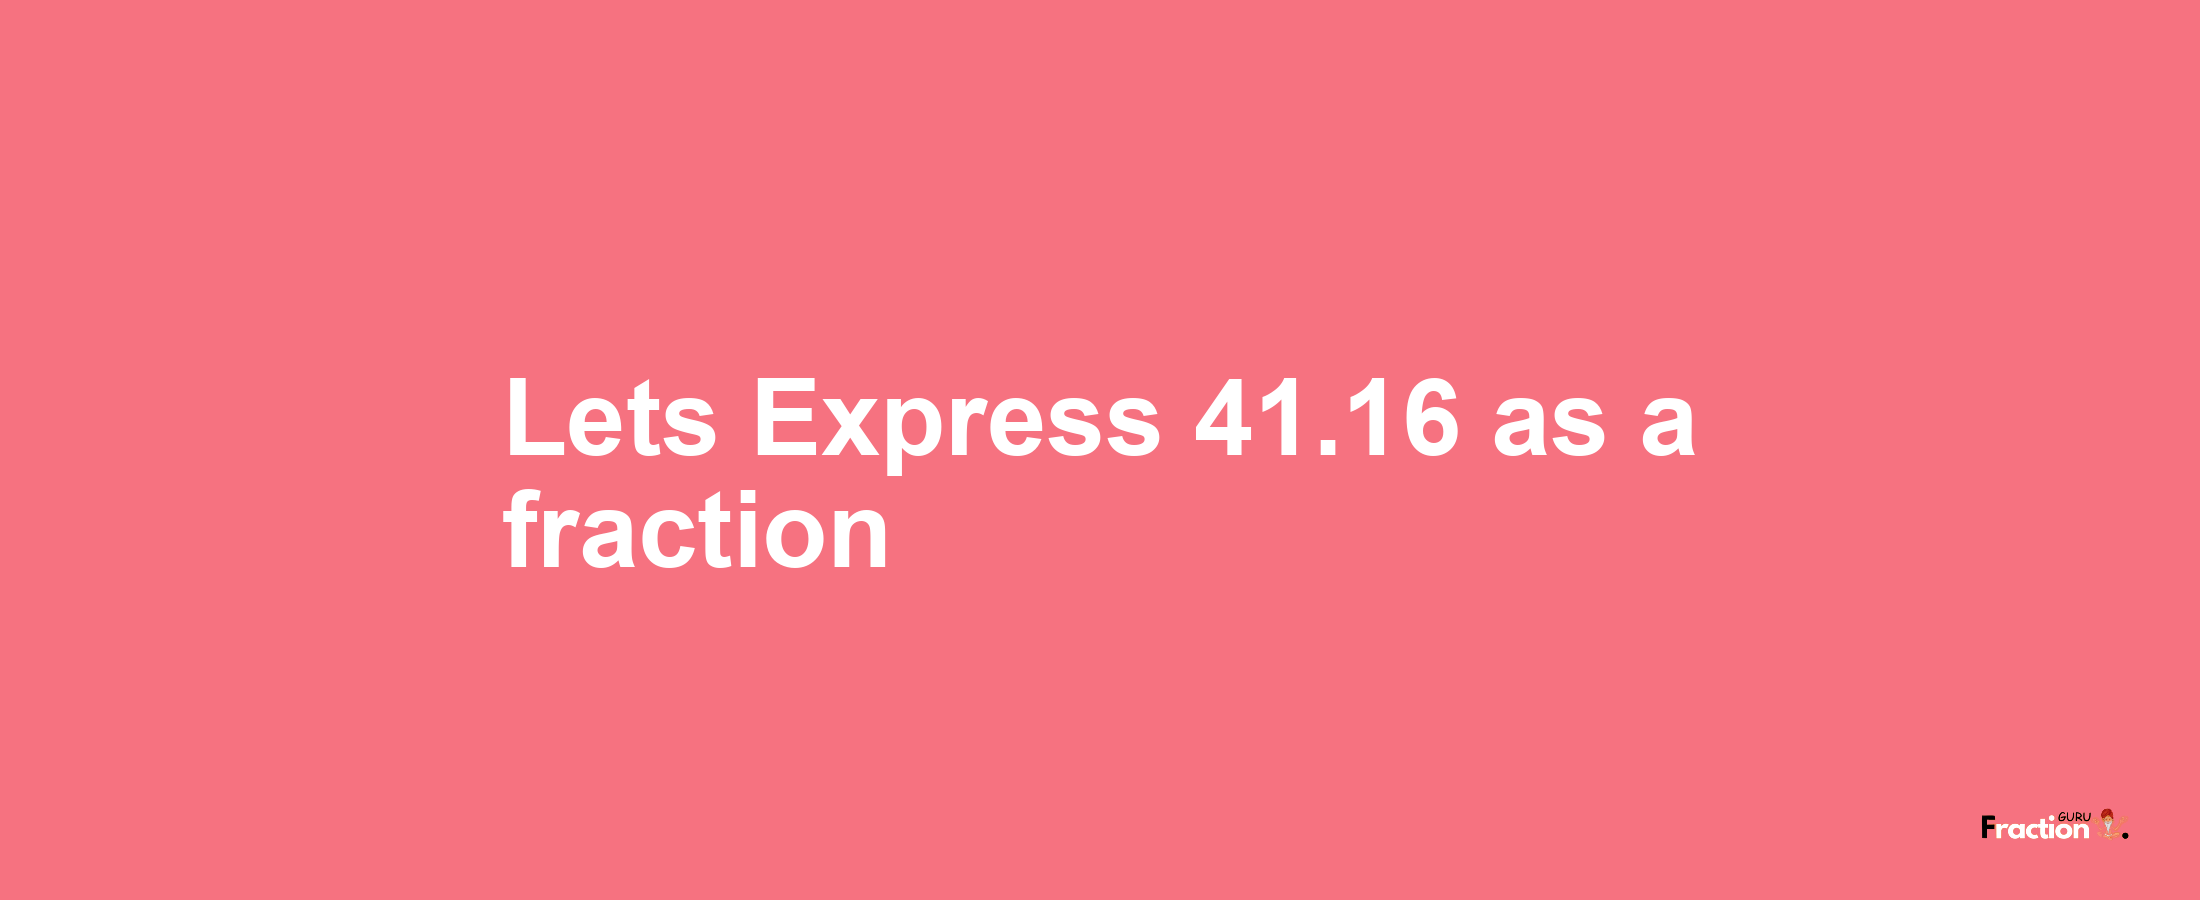 Lets Express 41.16 as afraction